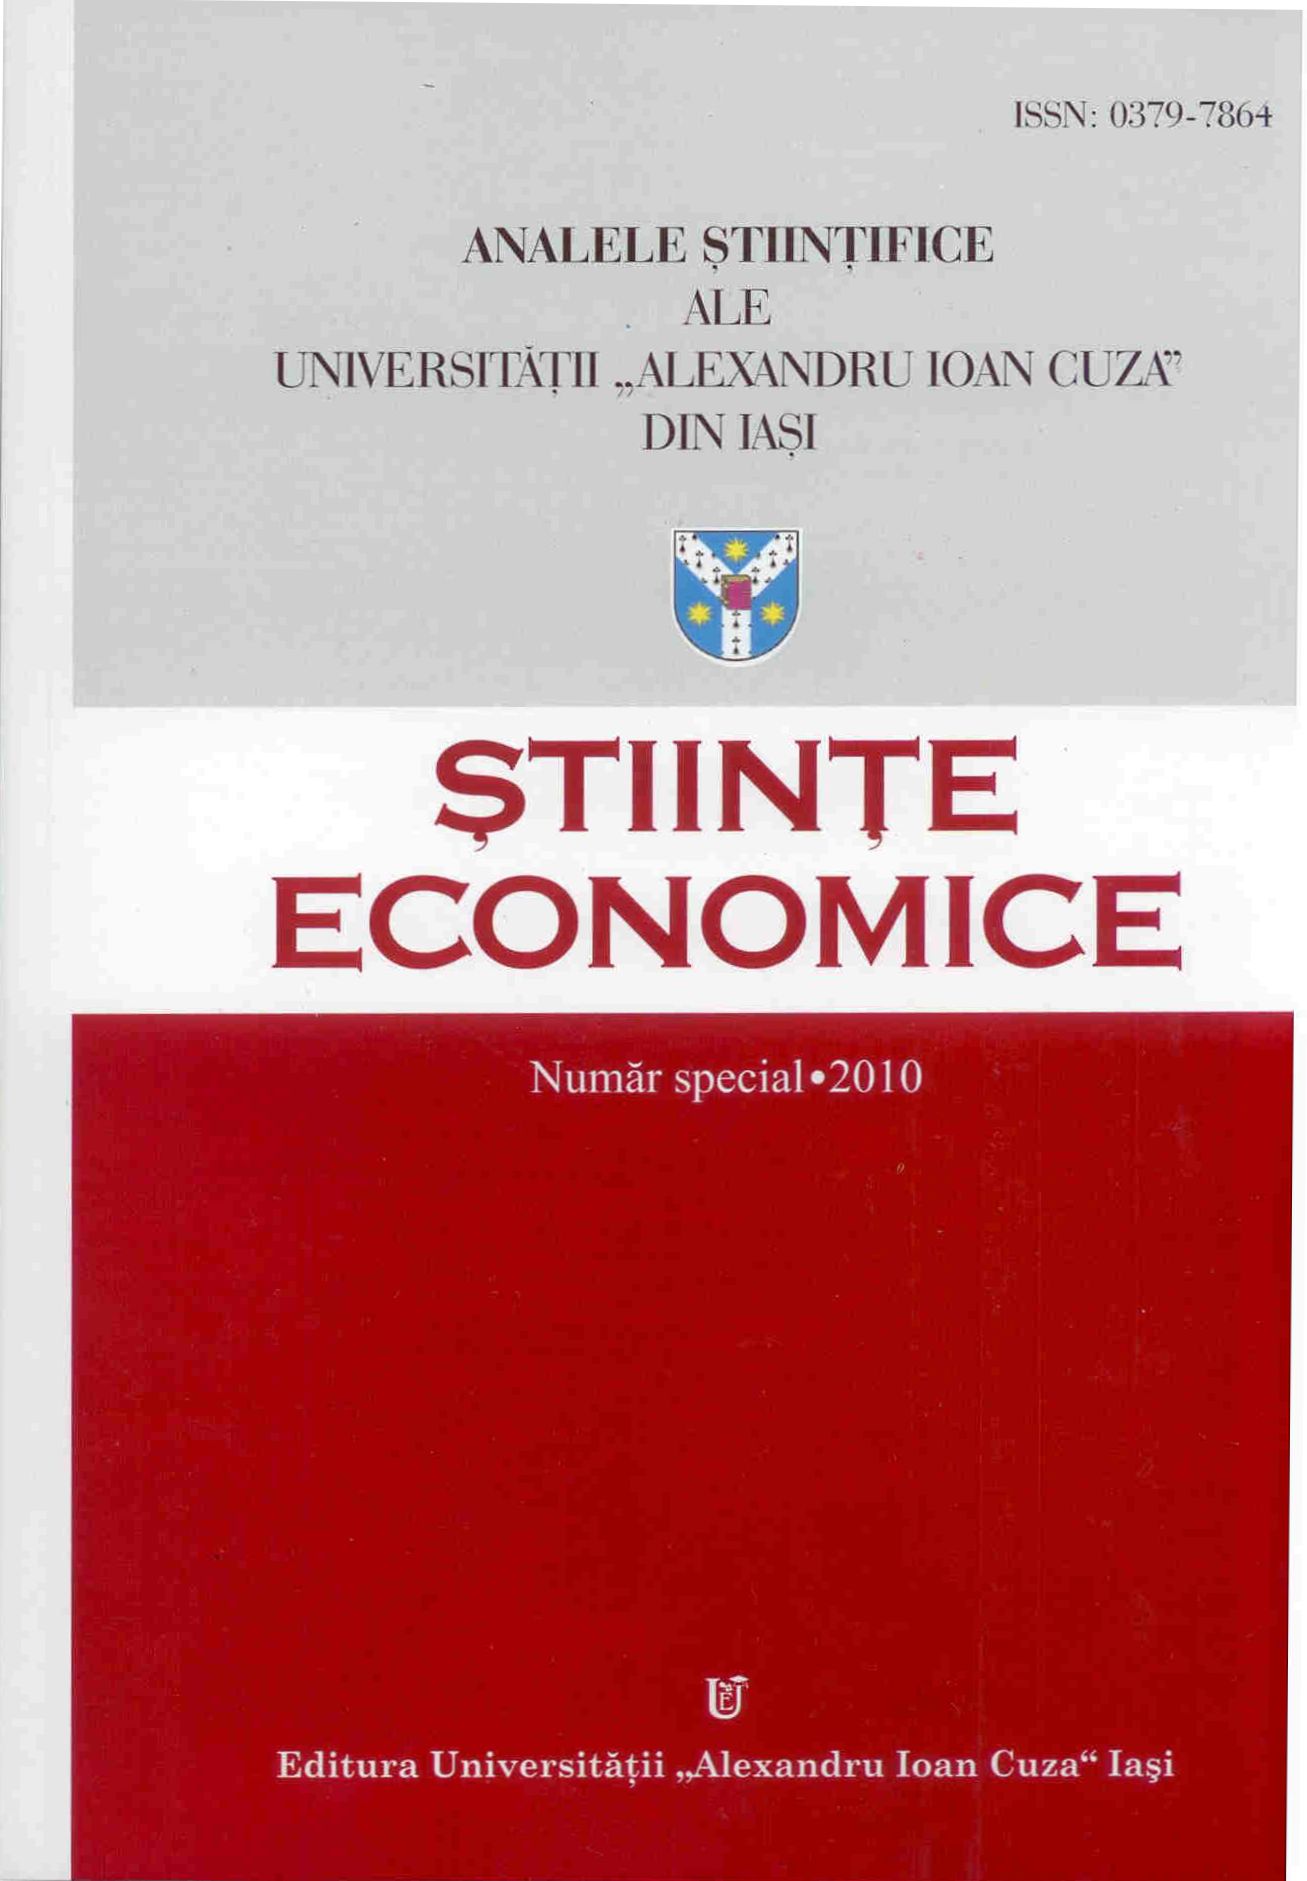 A comparative analysis of research – development and innovation activities in Romania